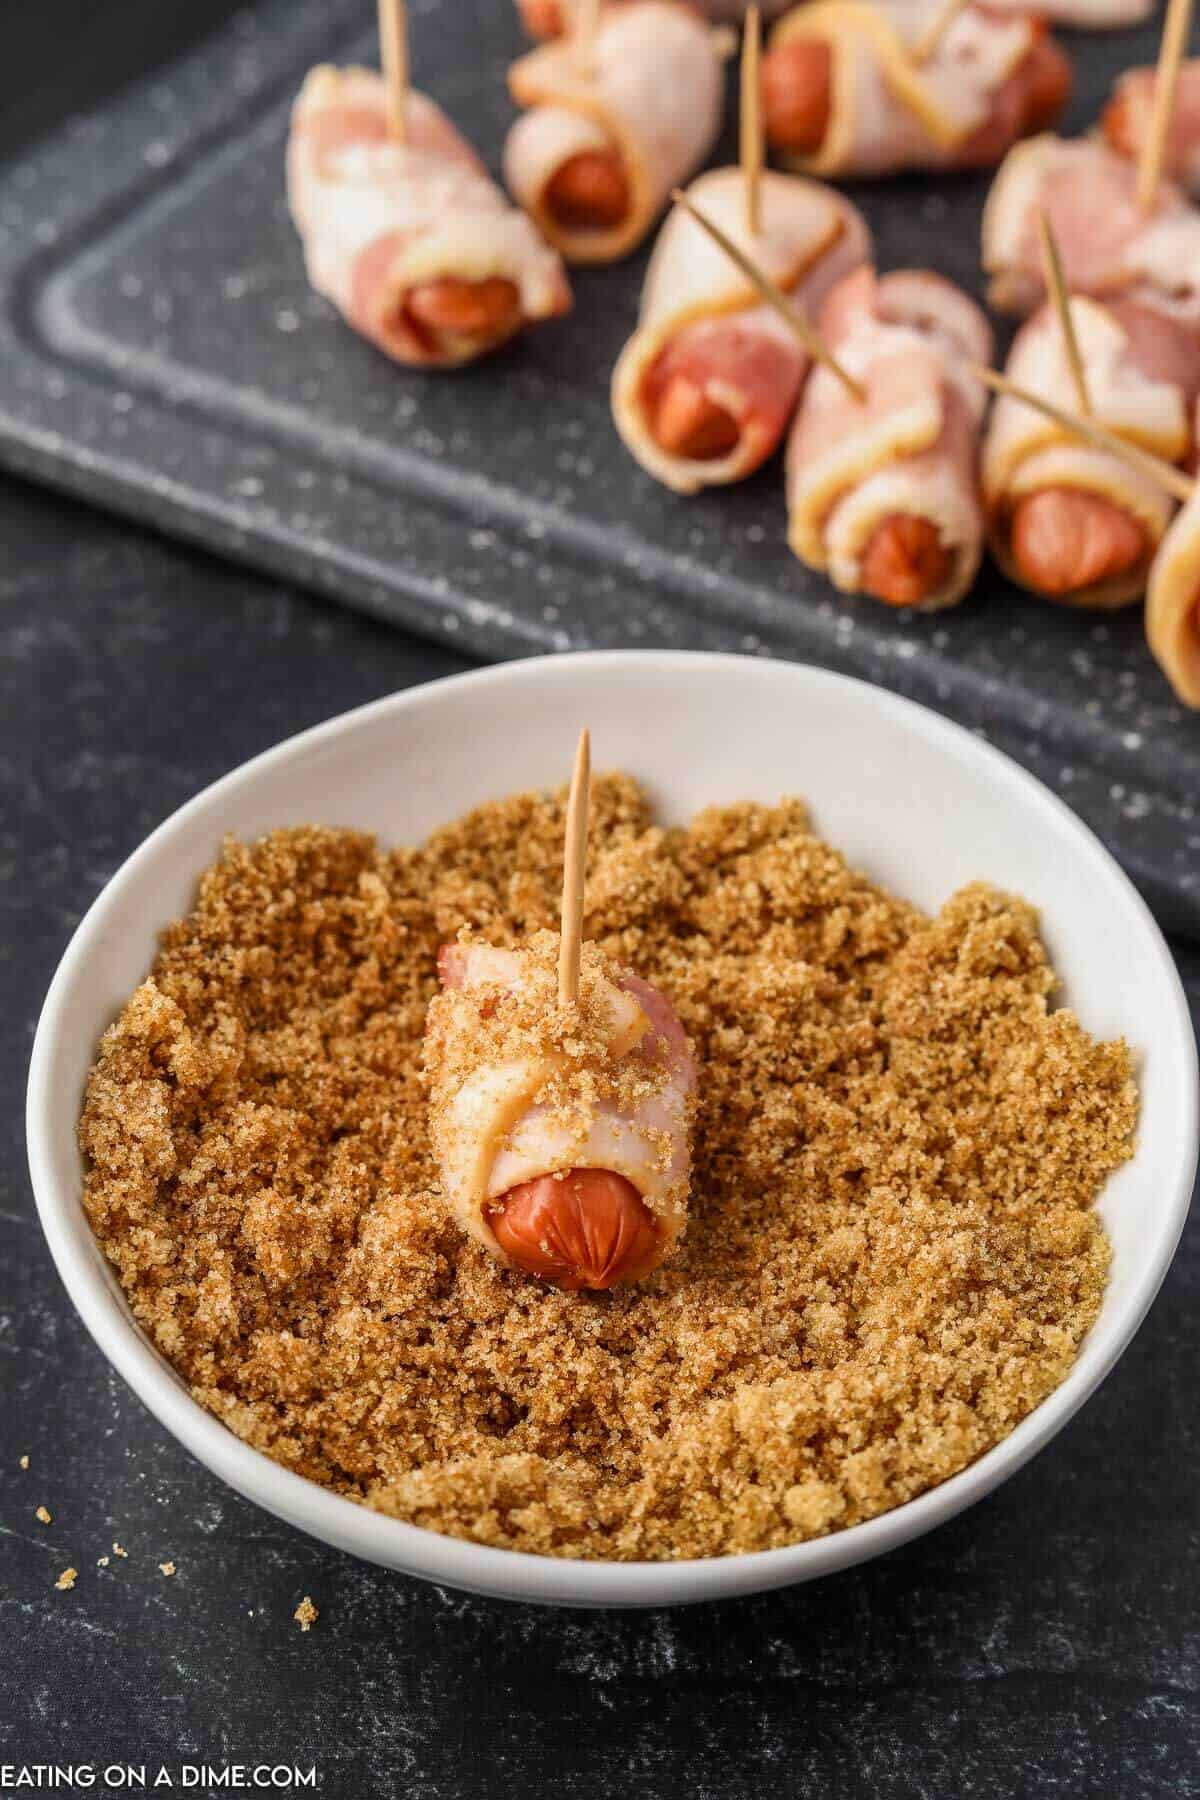 Dipping bacon wrapped smokies into the brown sugar mixture